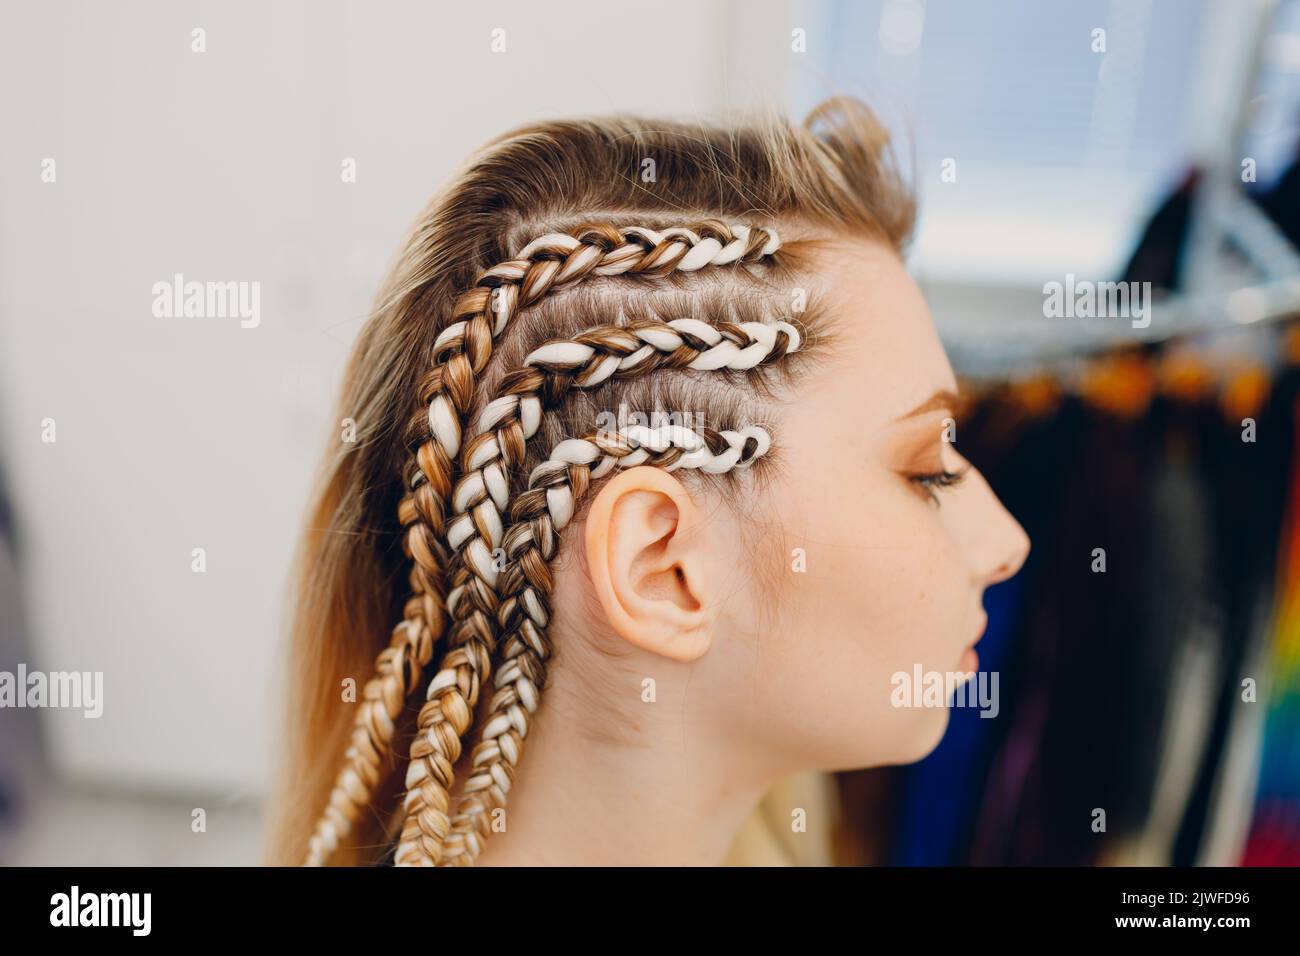 Hairstylist braided afro braids dreadlocks kanekalon pigtails hair of female client in barber salon. Stock Photo